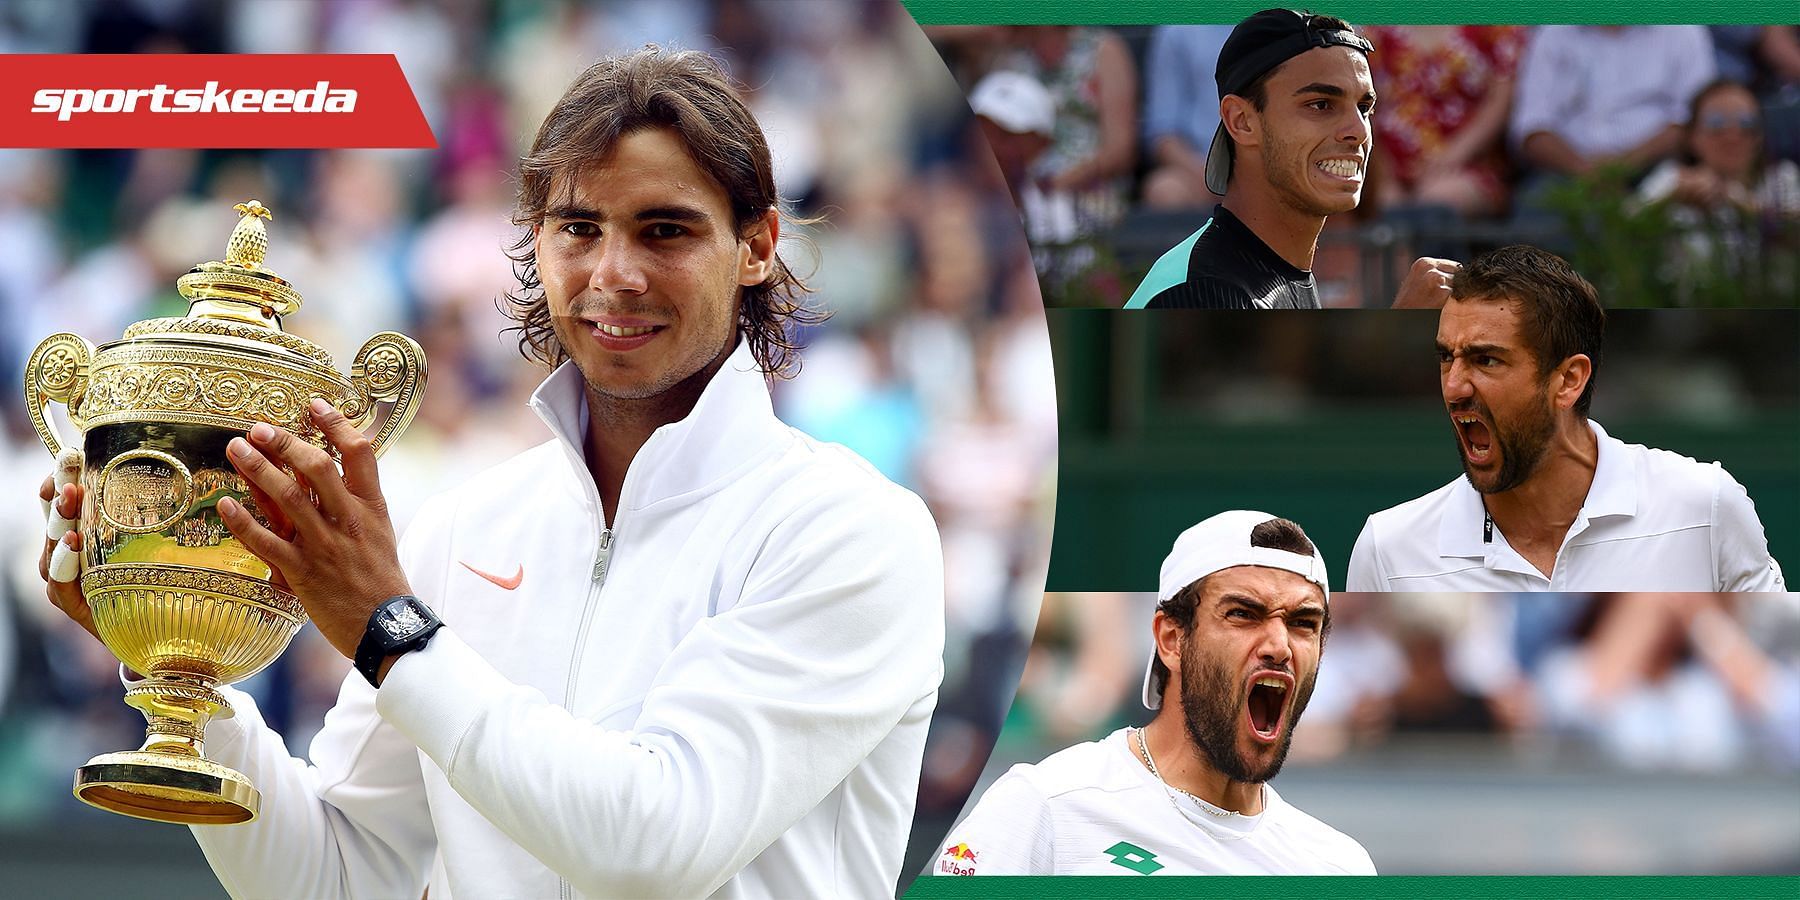 Rafael Nadal&#039;s Wimbledon draw is quite challenging.